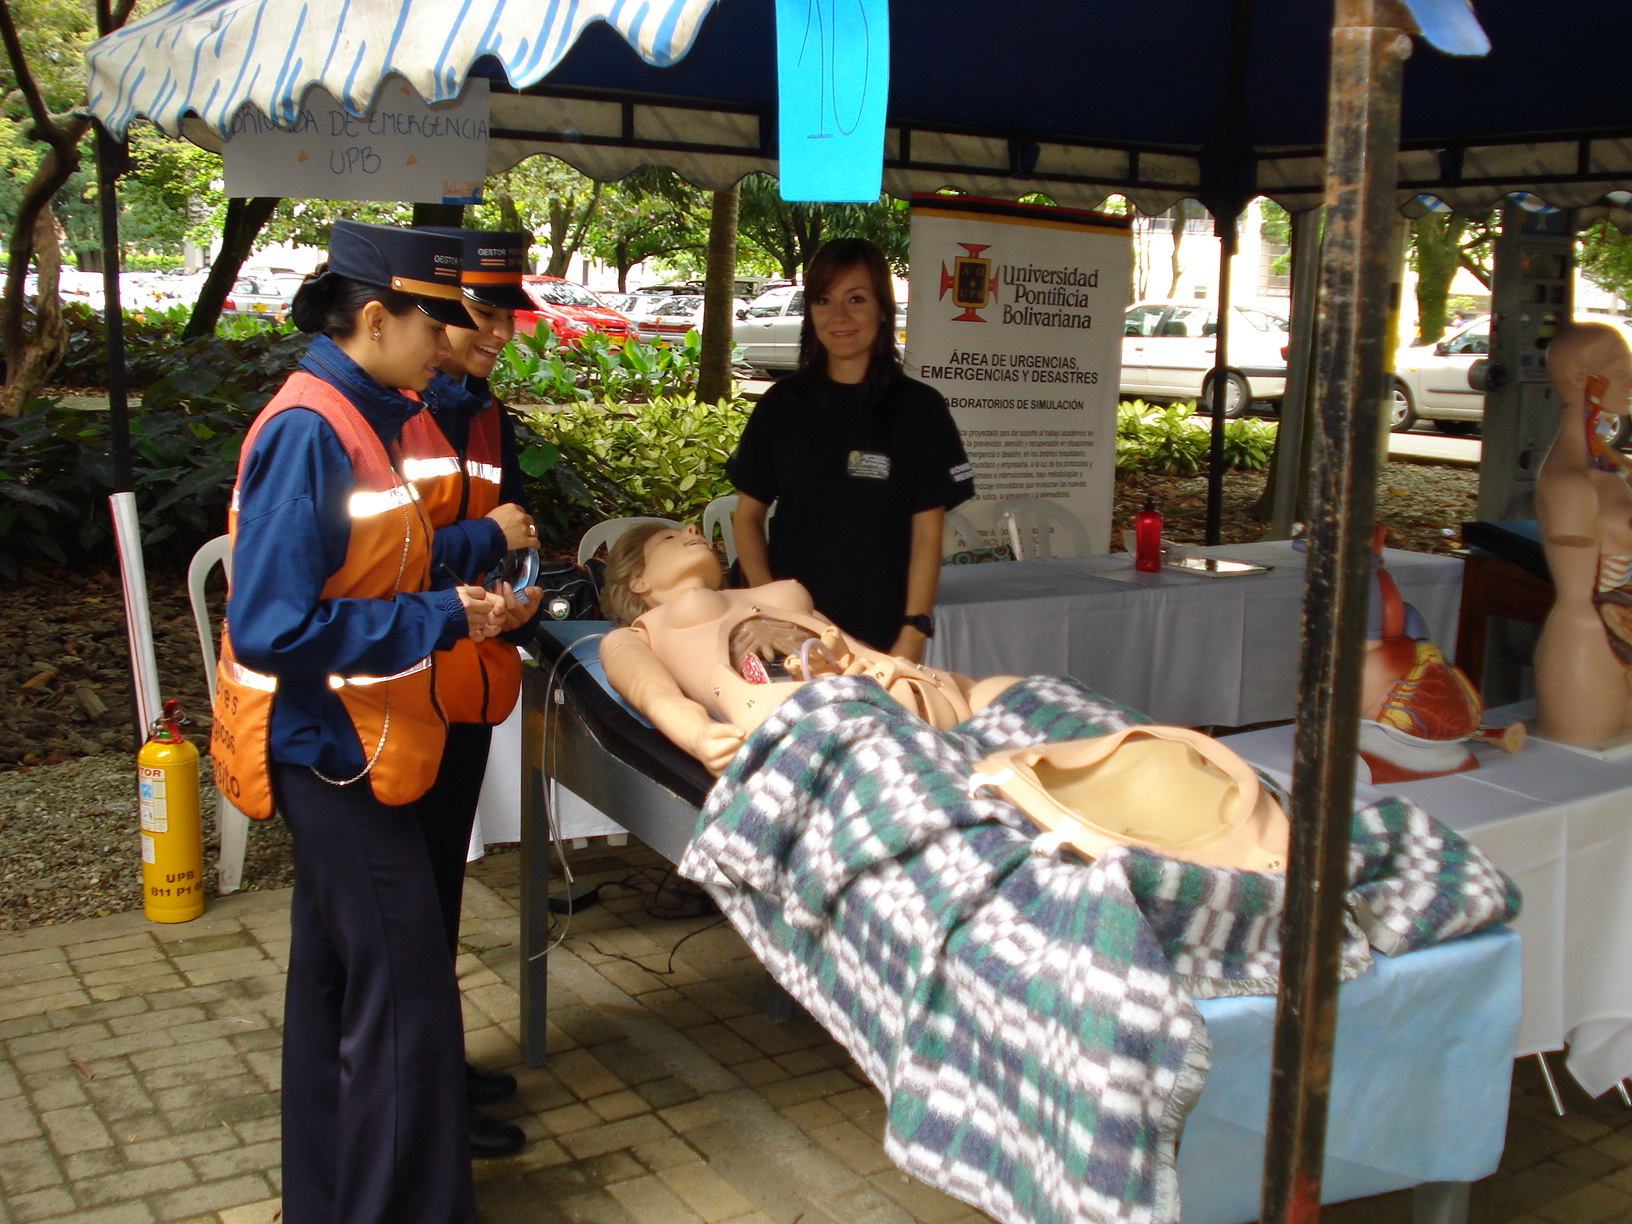 a person receiving oxygen from an ambulance